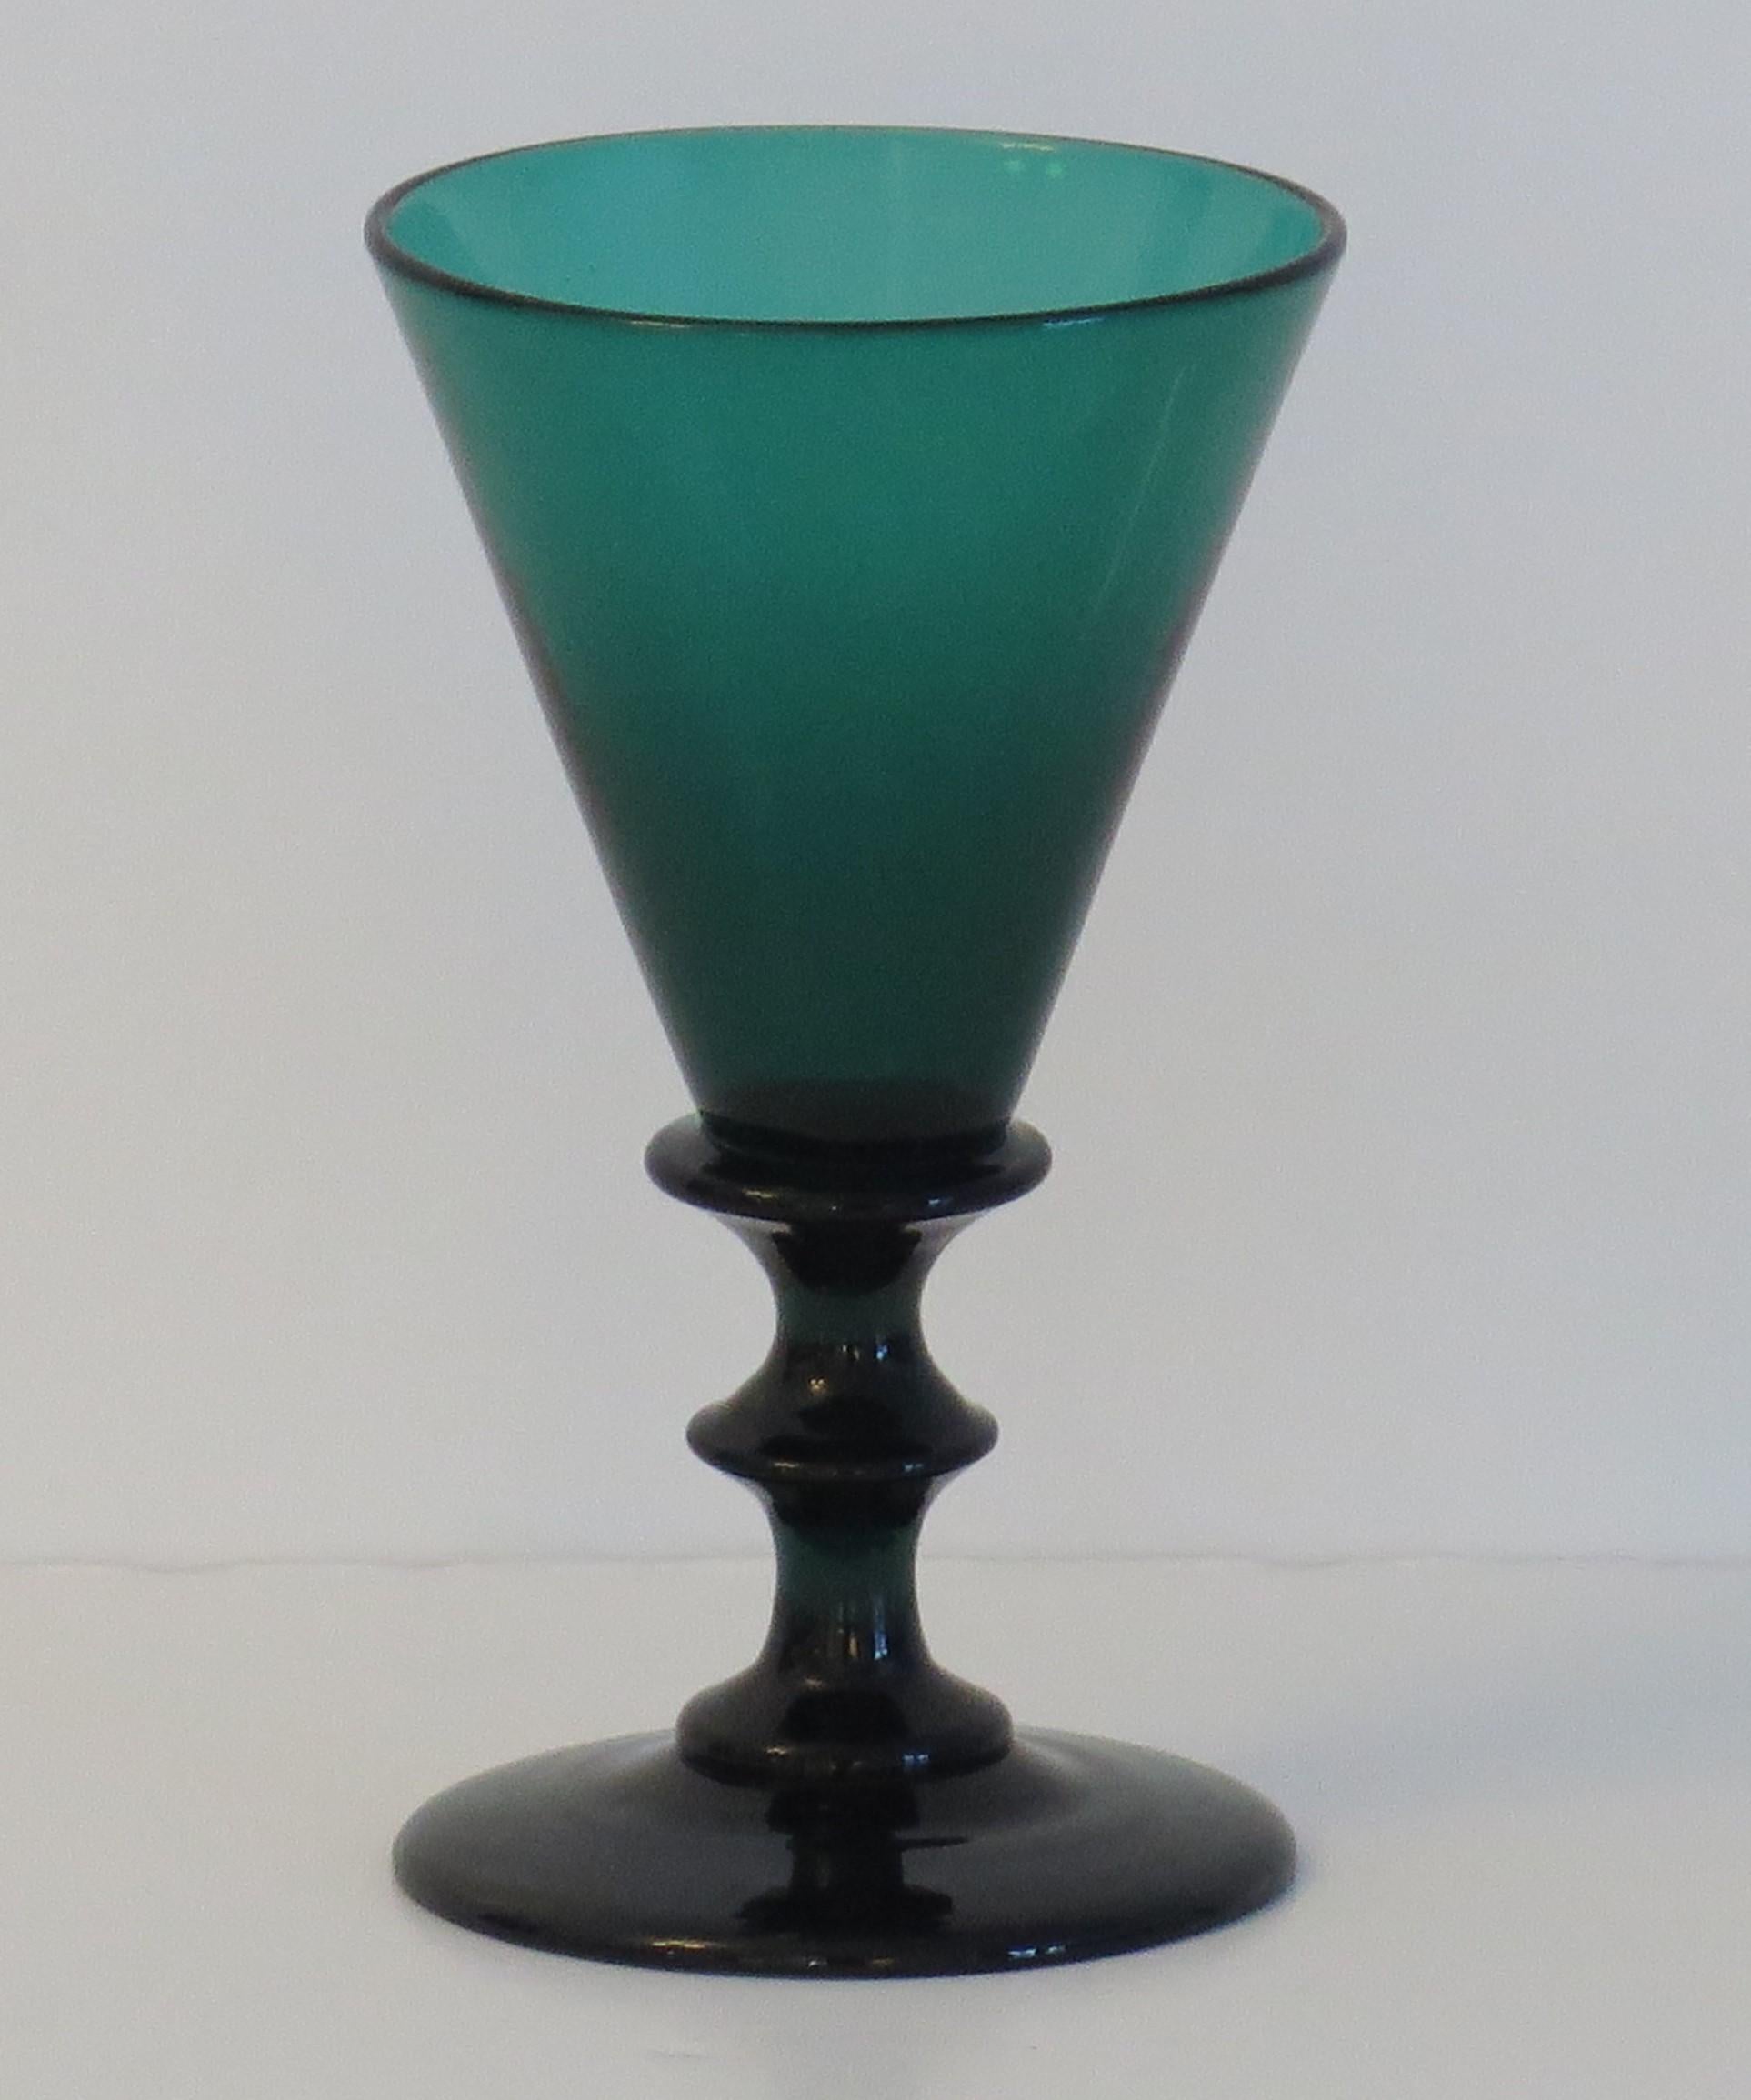 This is an excellent example of an early 19th century, English, hand blown, Bristol green wine drinking glass which we date to the George 111rd Regency period, circa 1815.

This glass has an elegant conical bowl with a bladed shoulder knop over a